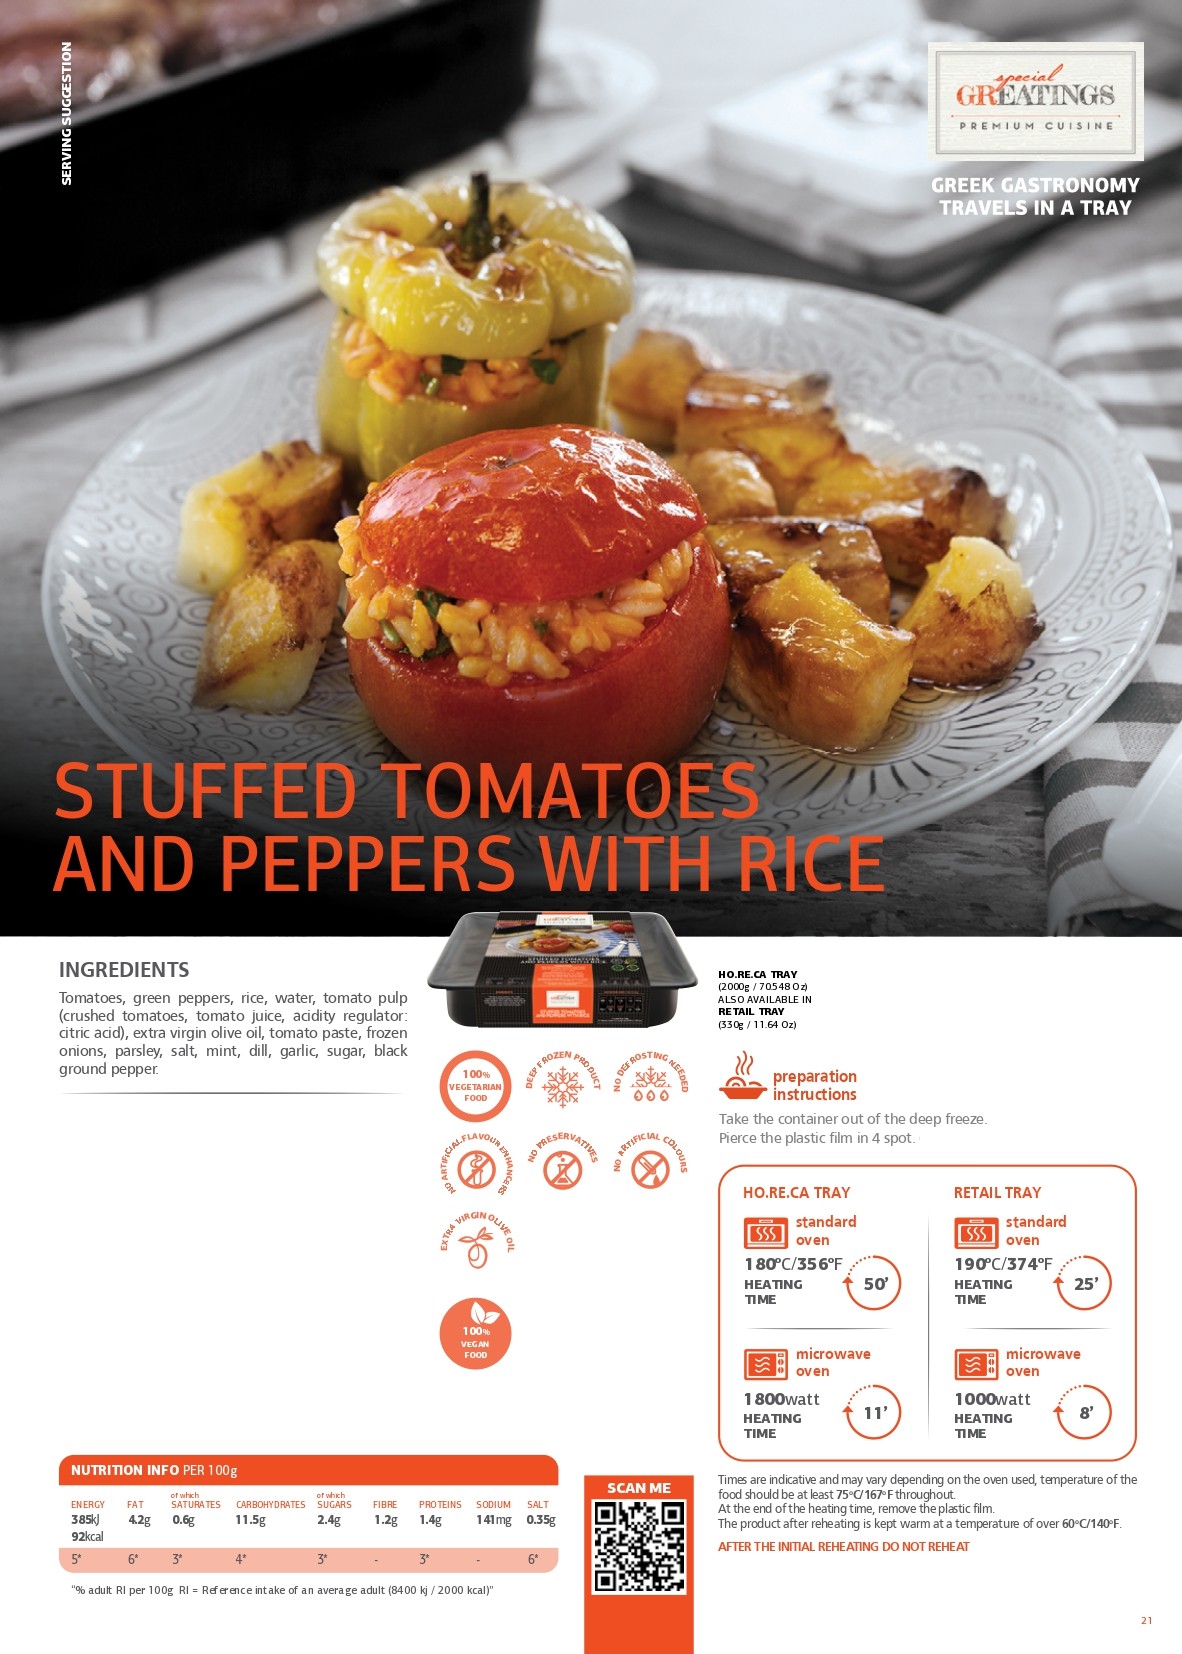 Stuffed tomatoes and peppers with rice pdf image